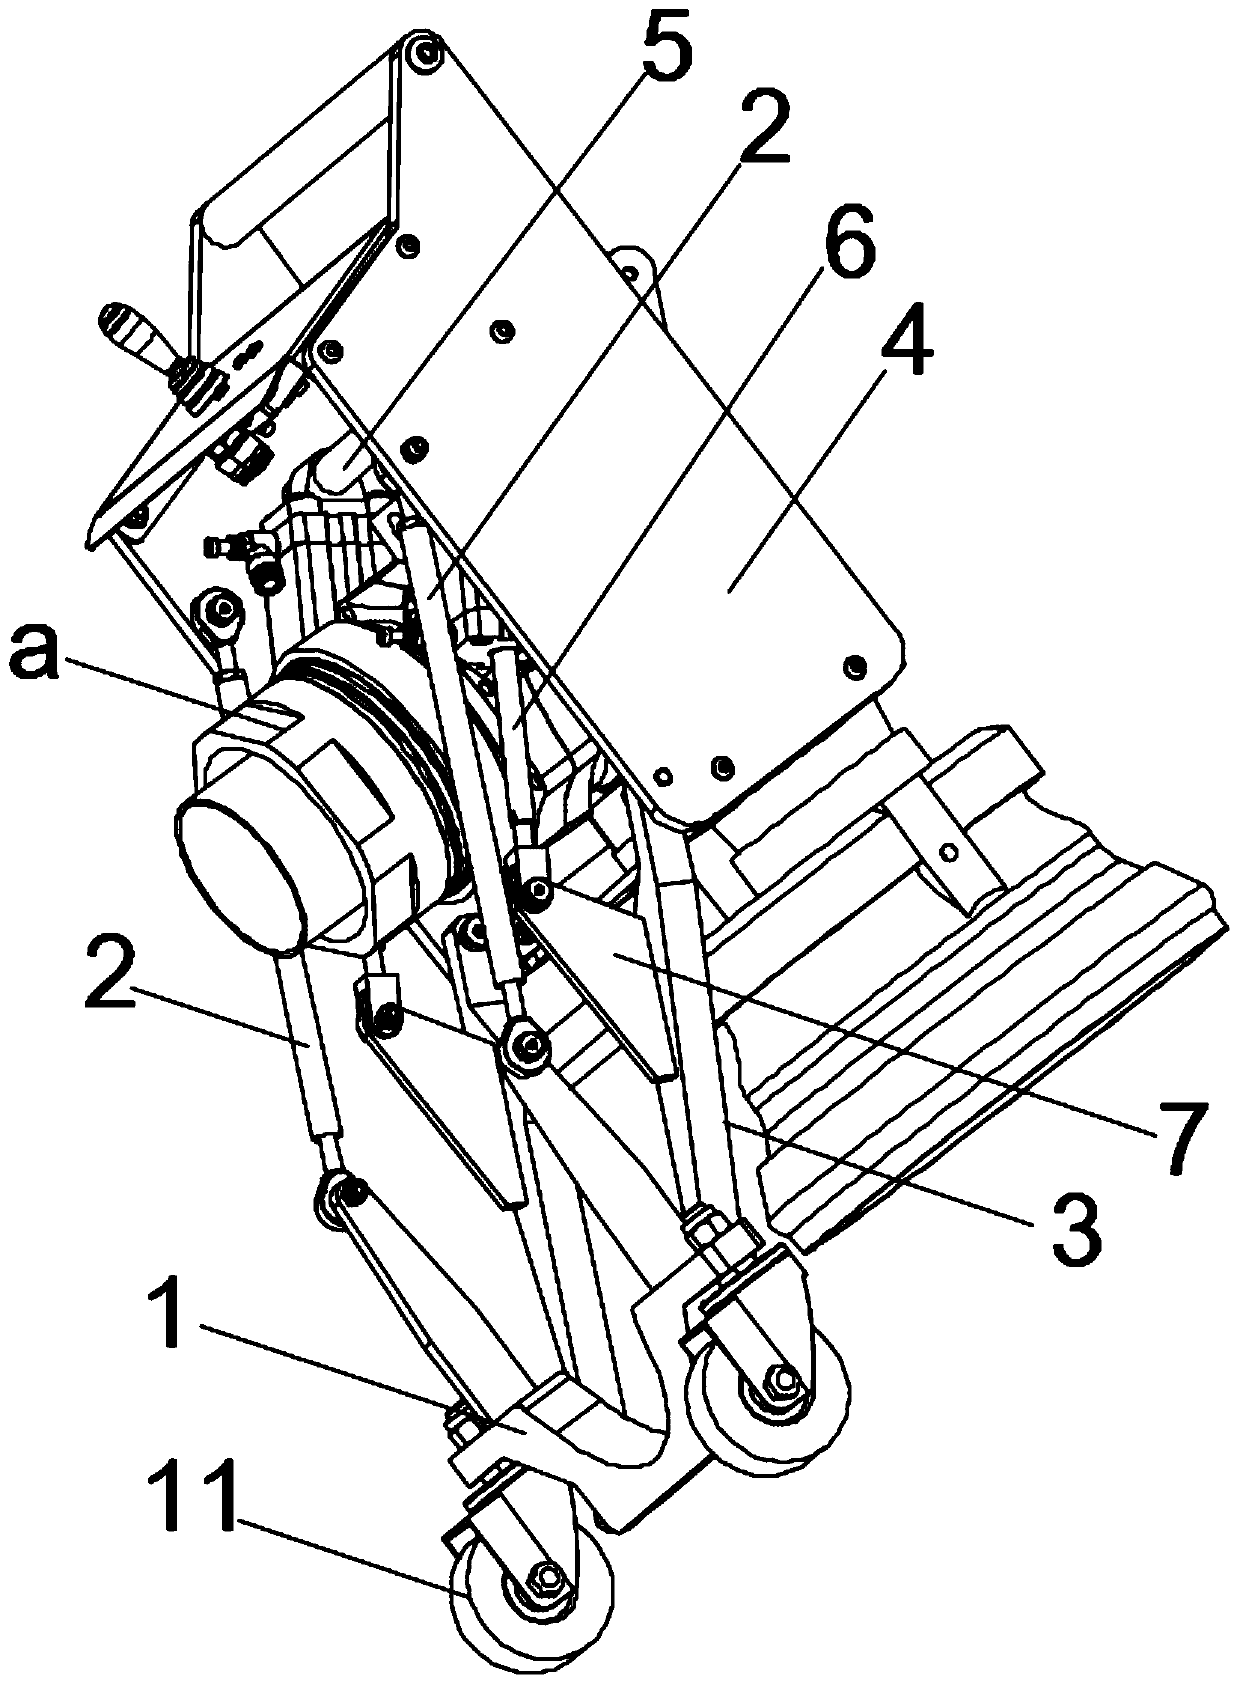 Aviation refueling connector lifting device